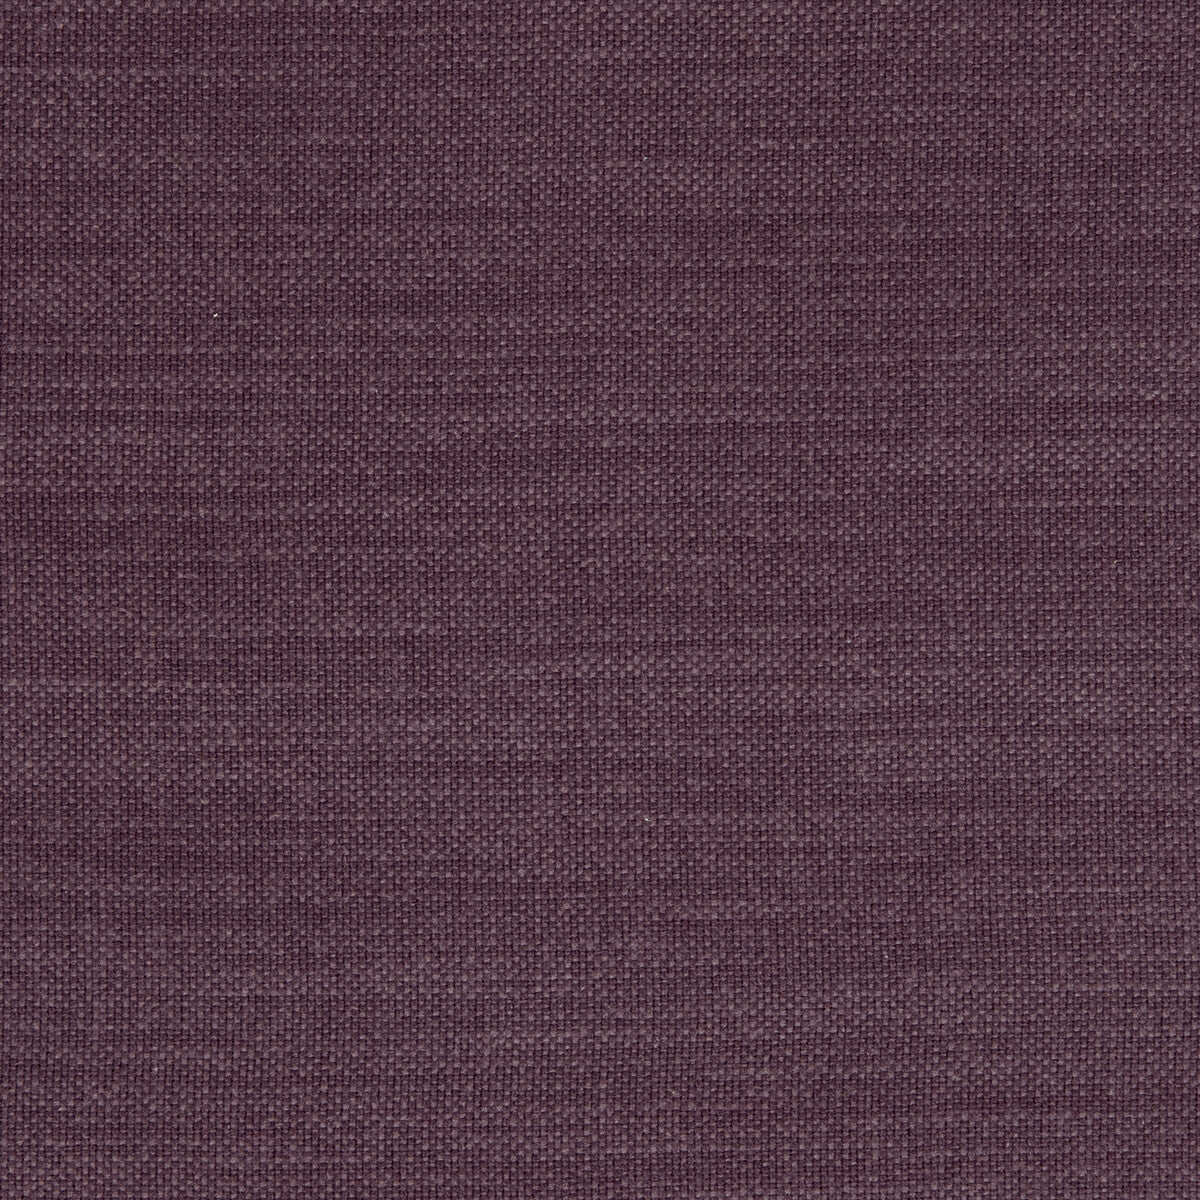 Nantucket fabric in grape color - pattern F0594/22.CAC.0 - by Clarke And Clarke in the Clarke &amp; Clarke Nantucket collection